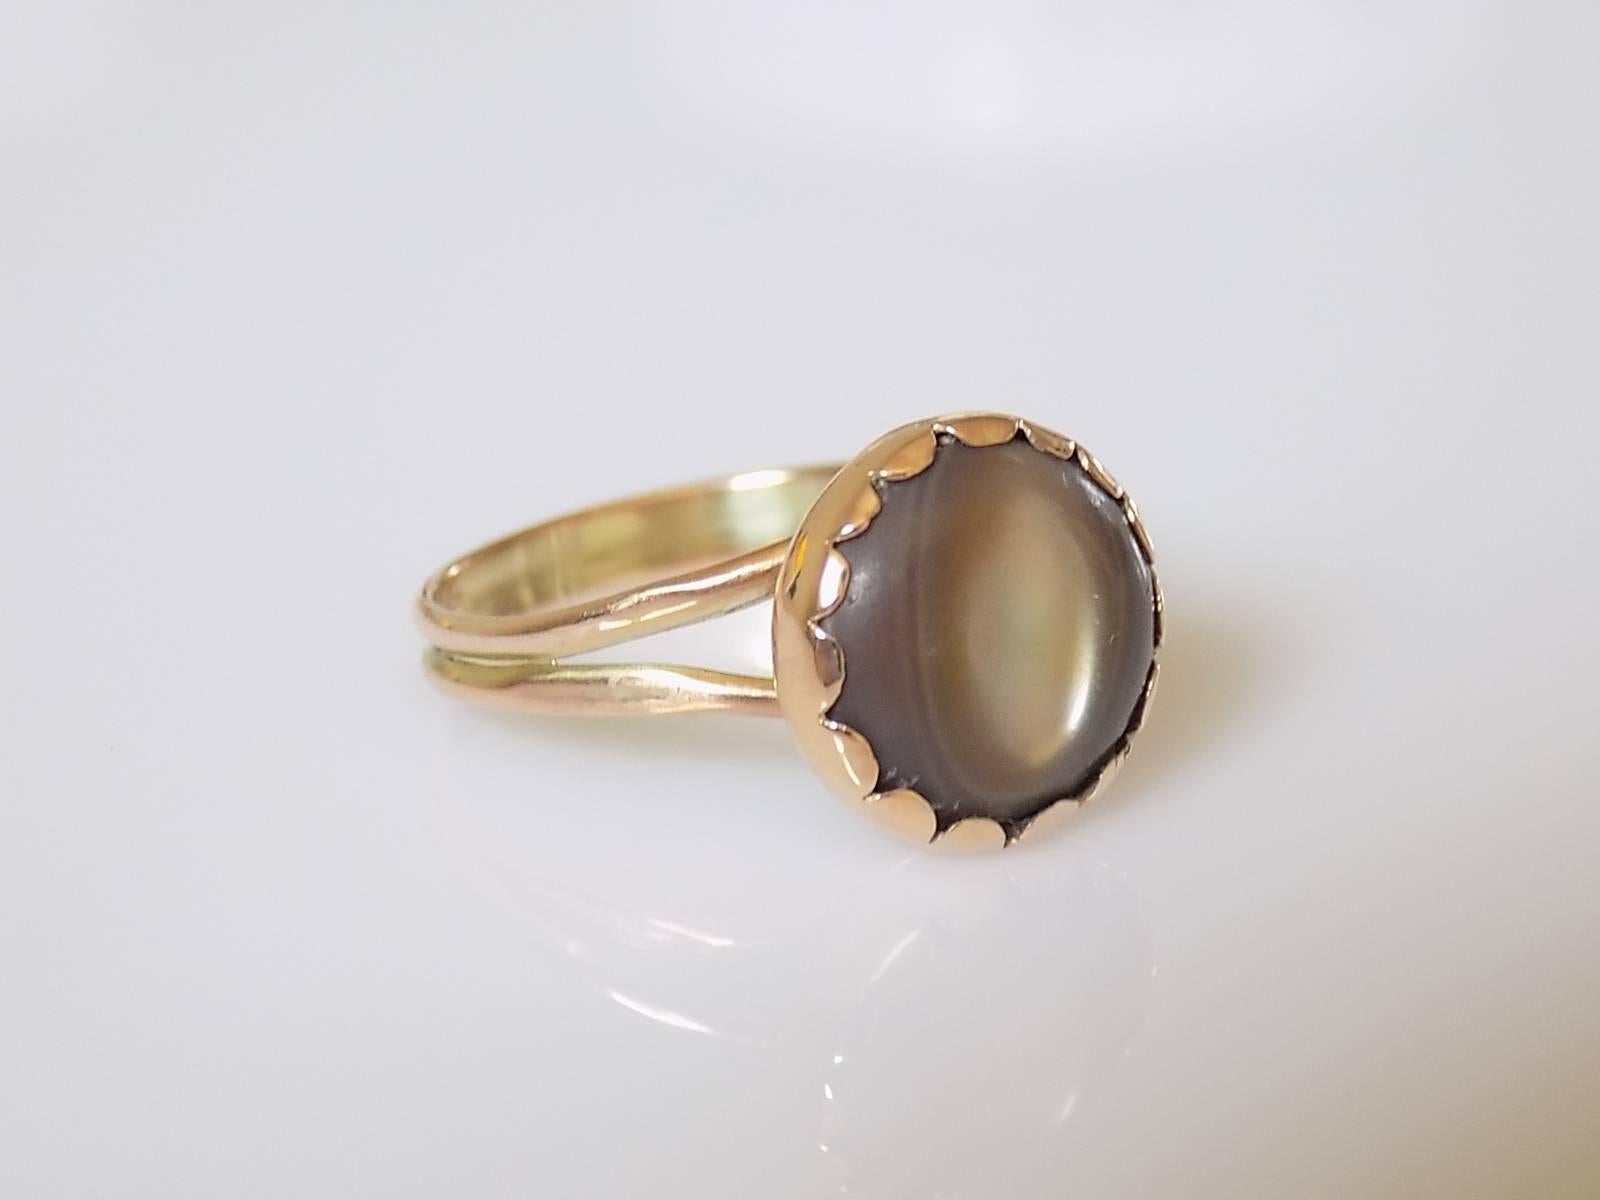 A Beautiful Victorian 9 Carat Gold and Mother of Pearl Cats eye ring. Mother of pearl with a rainbow of colors in the middle and in beautiful closed back setting. Rare find.

Size O 1/2 UK, 7.75 US.

Height of the face 13mm.

Weight